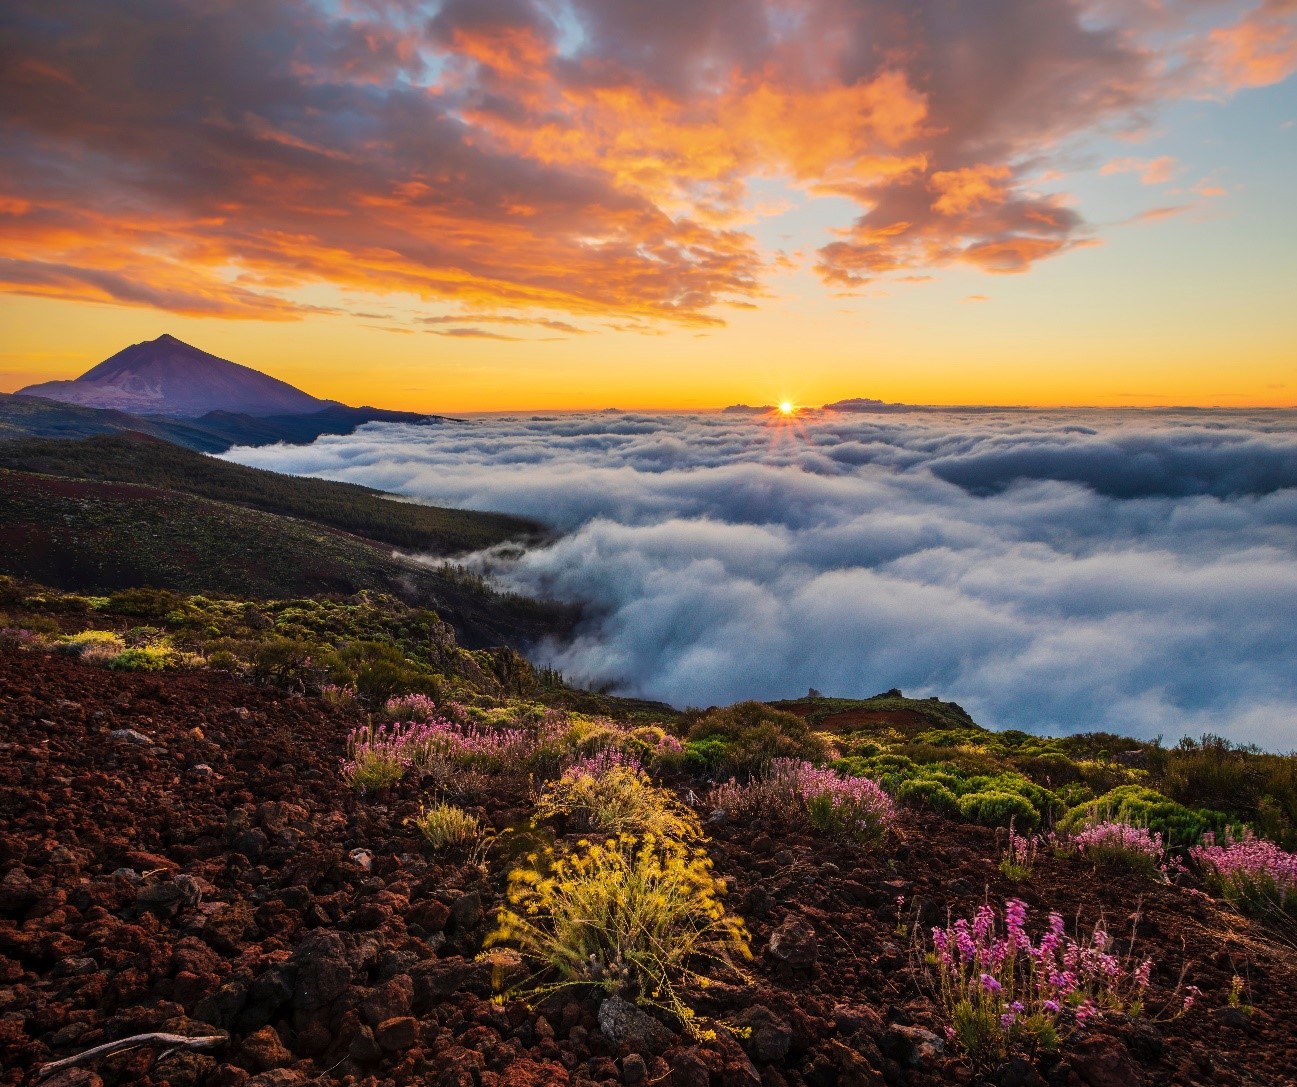 Experiences on Mount Teide – stars, hiking trails and Martian landscapes